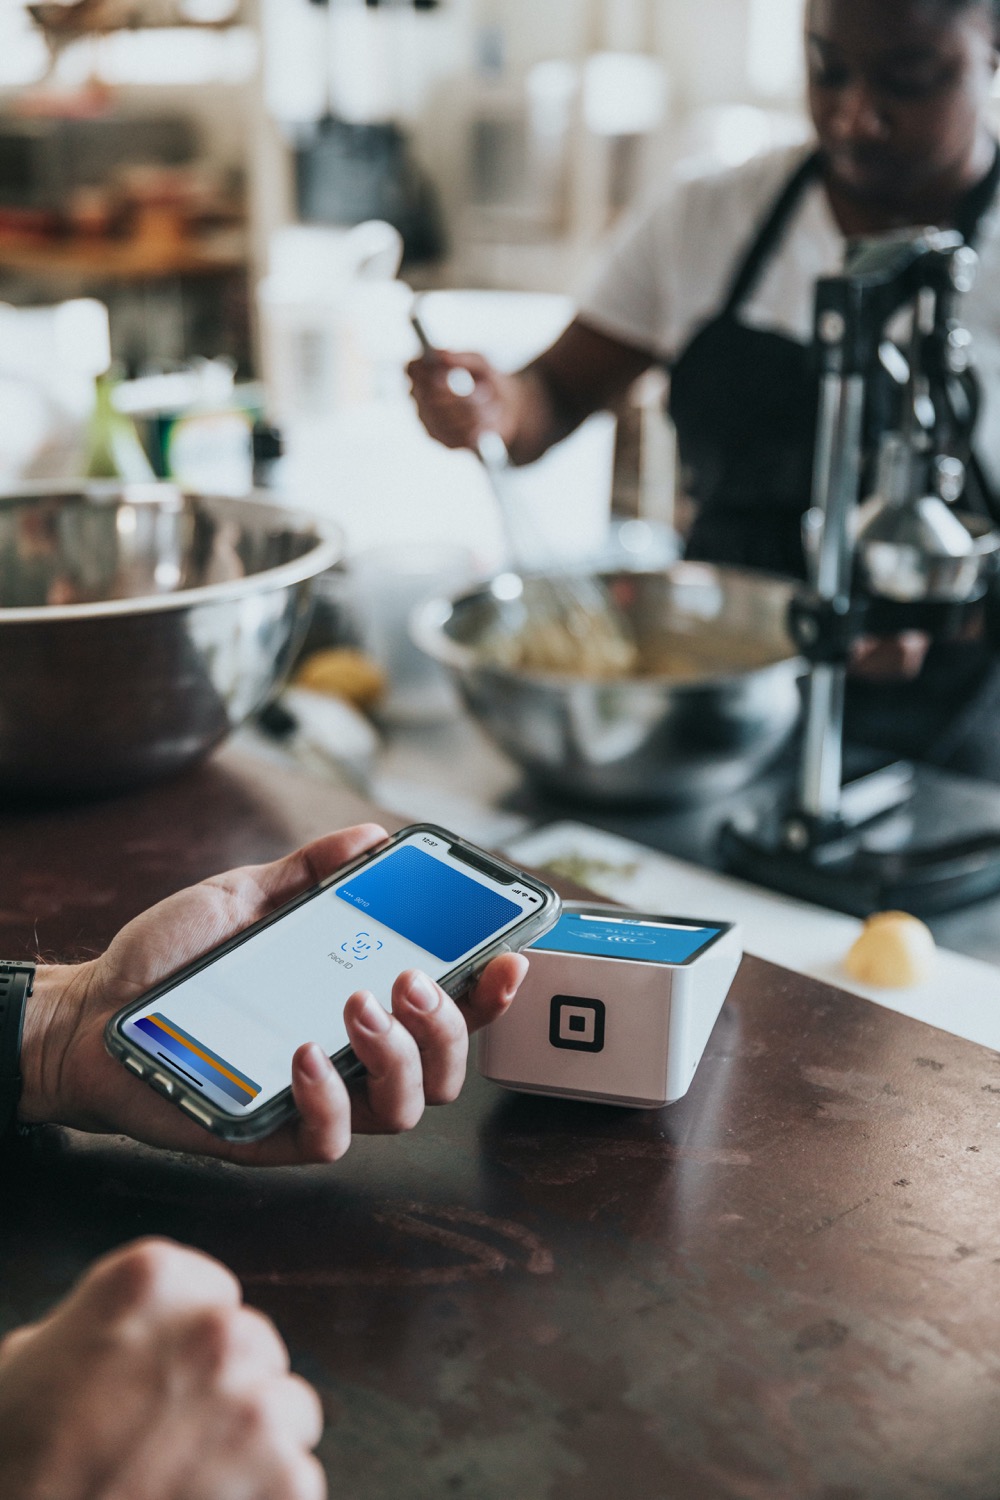 8 Things You Should Know About the Benefits of Mobile Payment in Restaurants